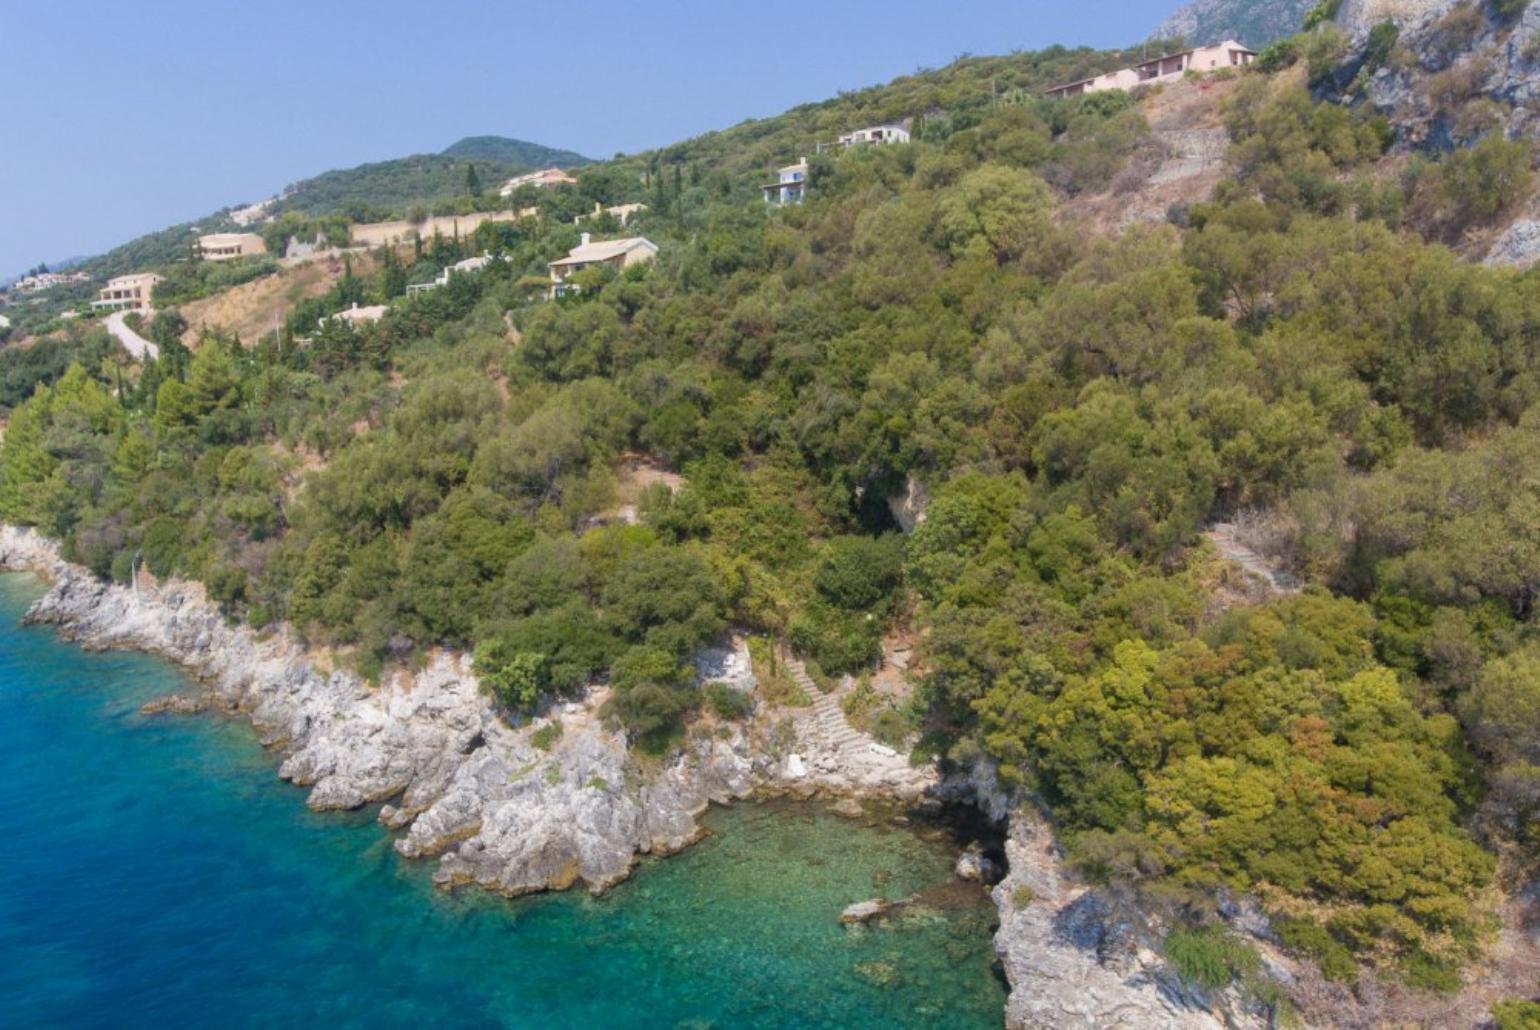 Local cove easily accessed from Villa Luisa